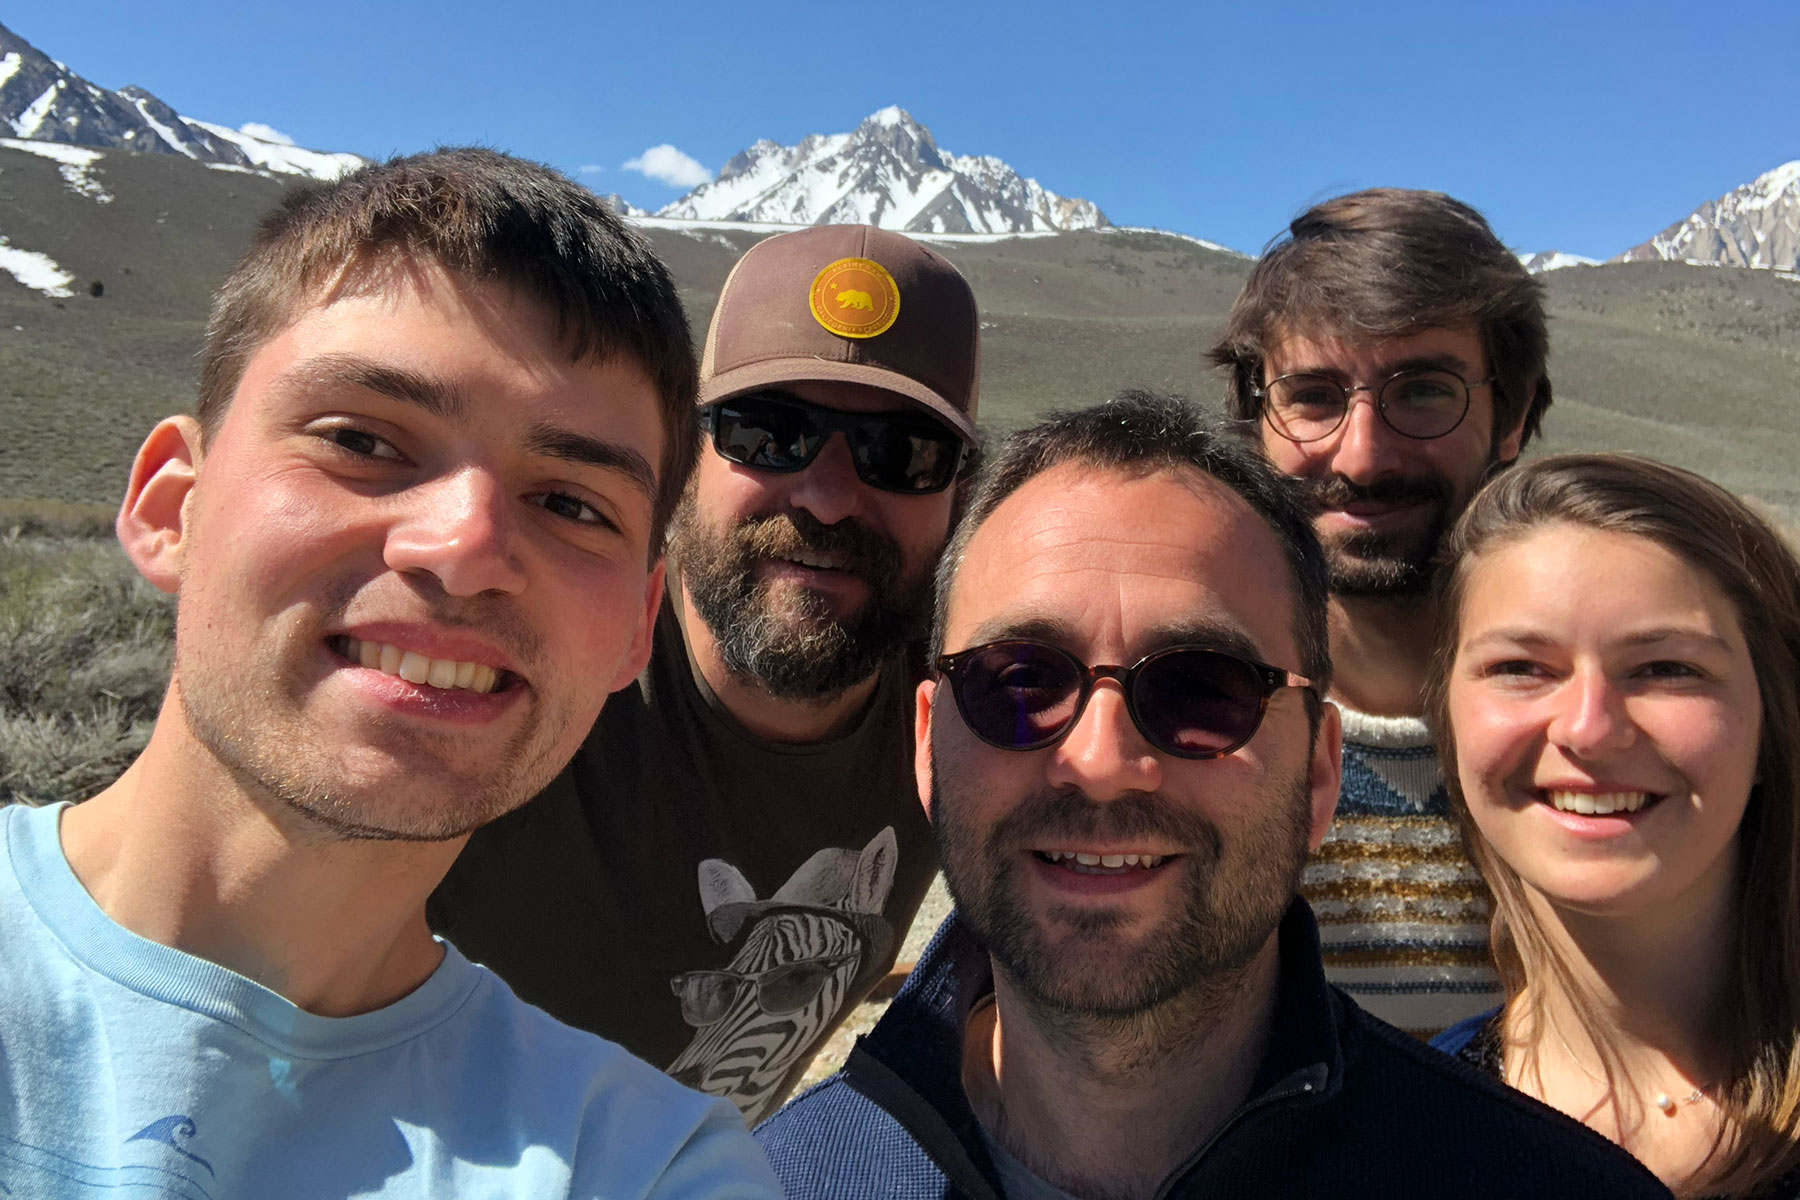 Five people take a group selfie with a view of snow-capped peaks in the background.